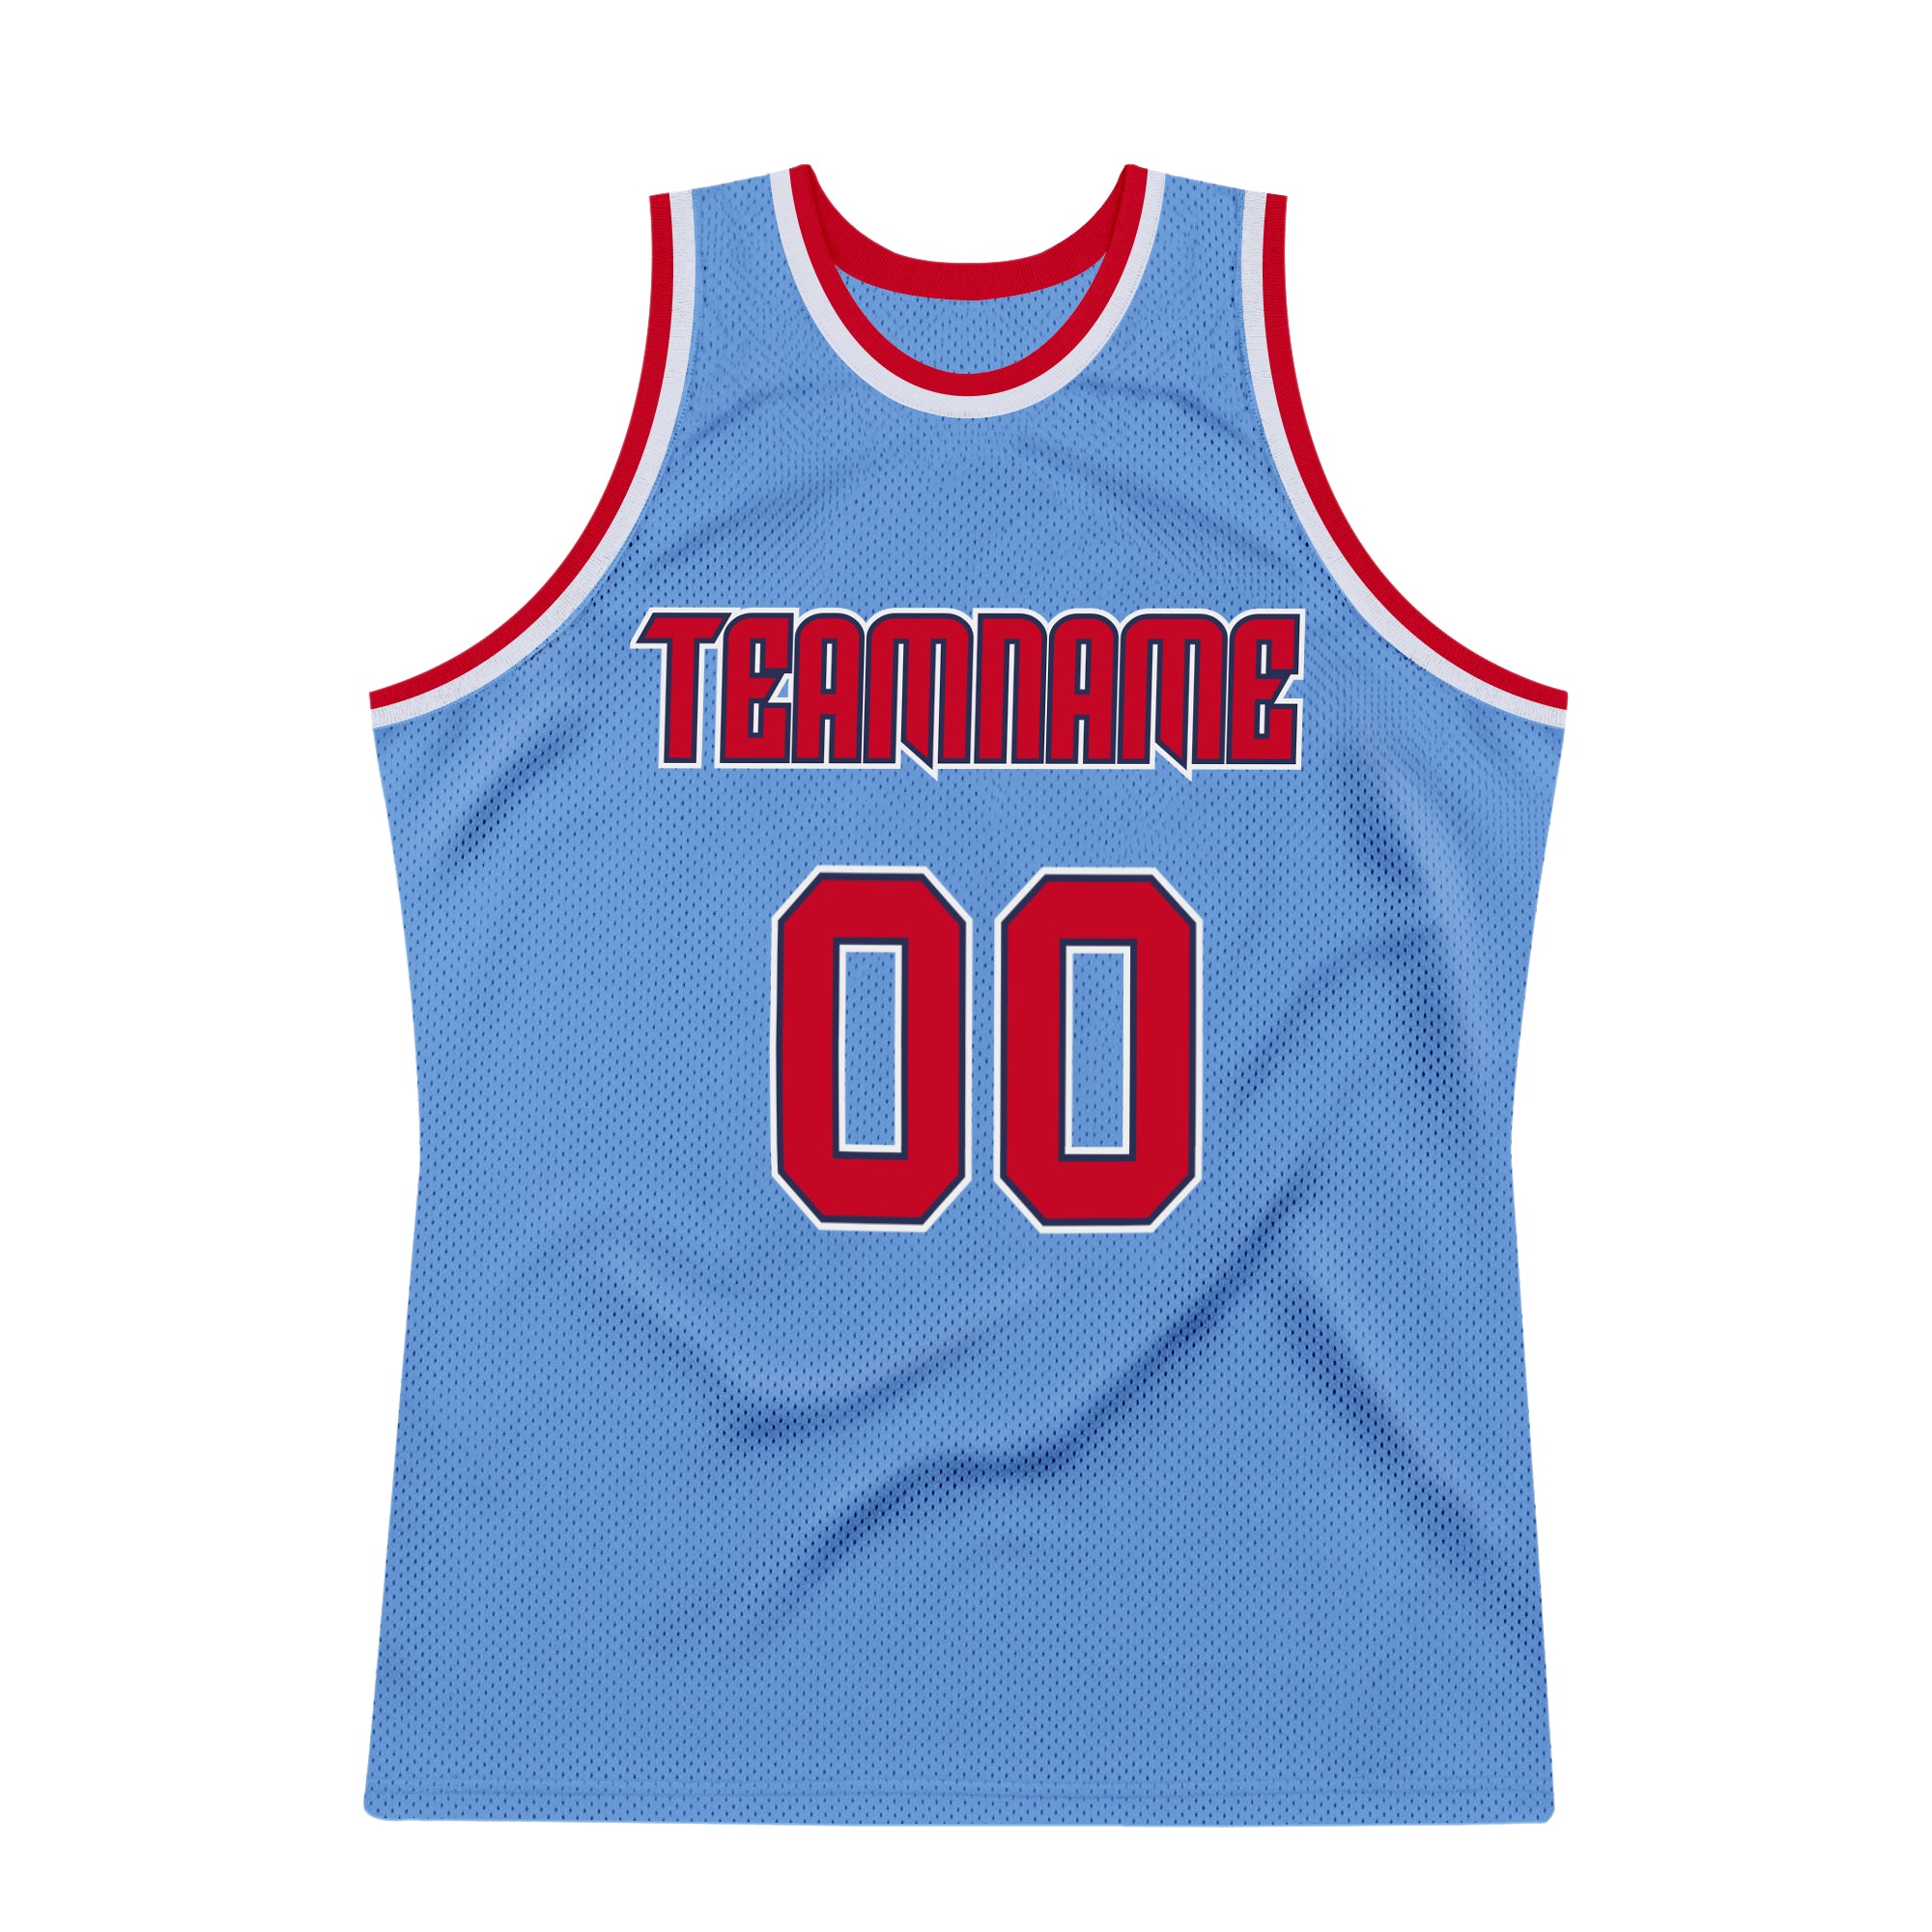 light blue and red basketball jersey